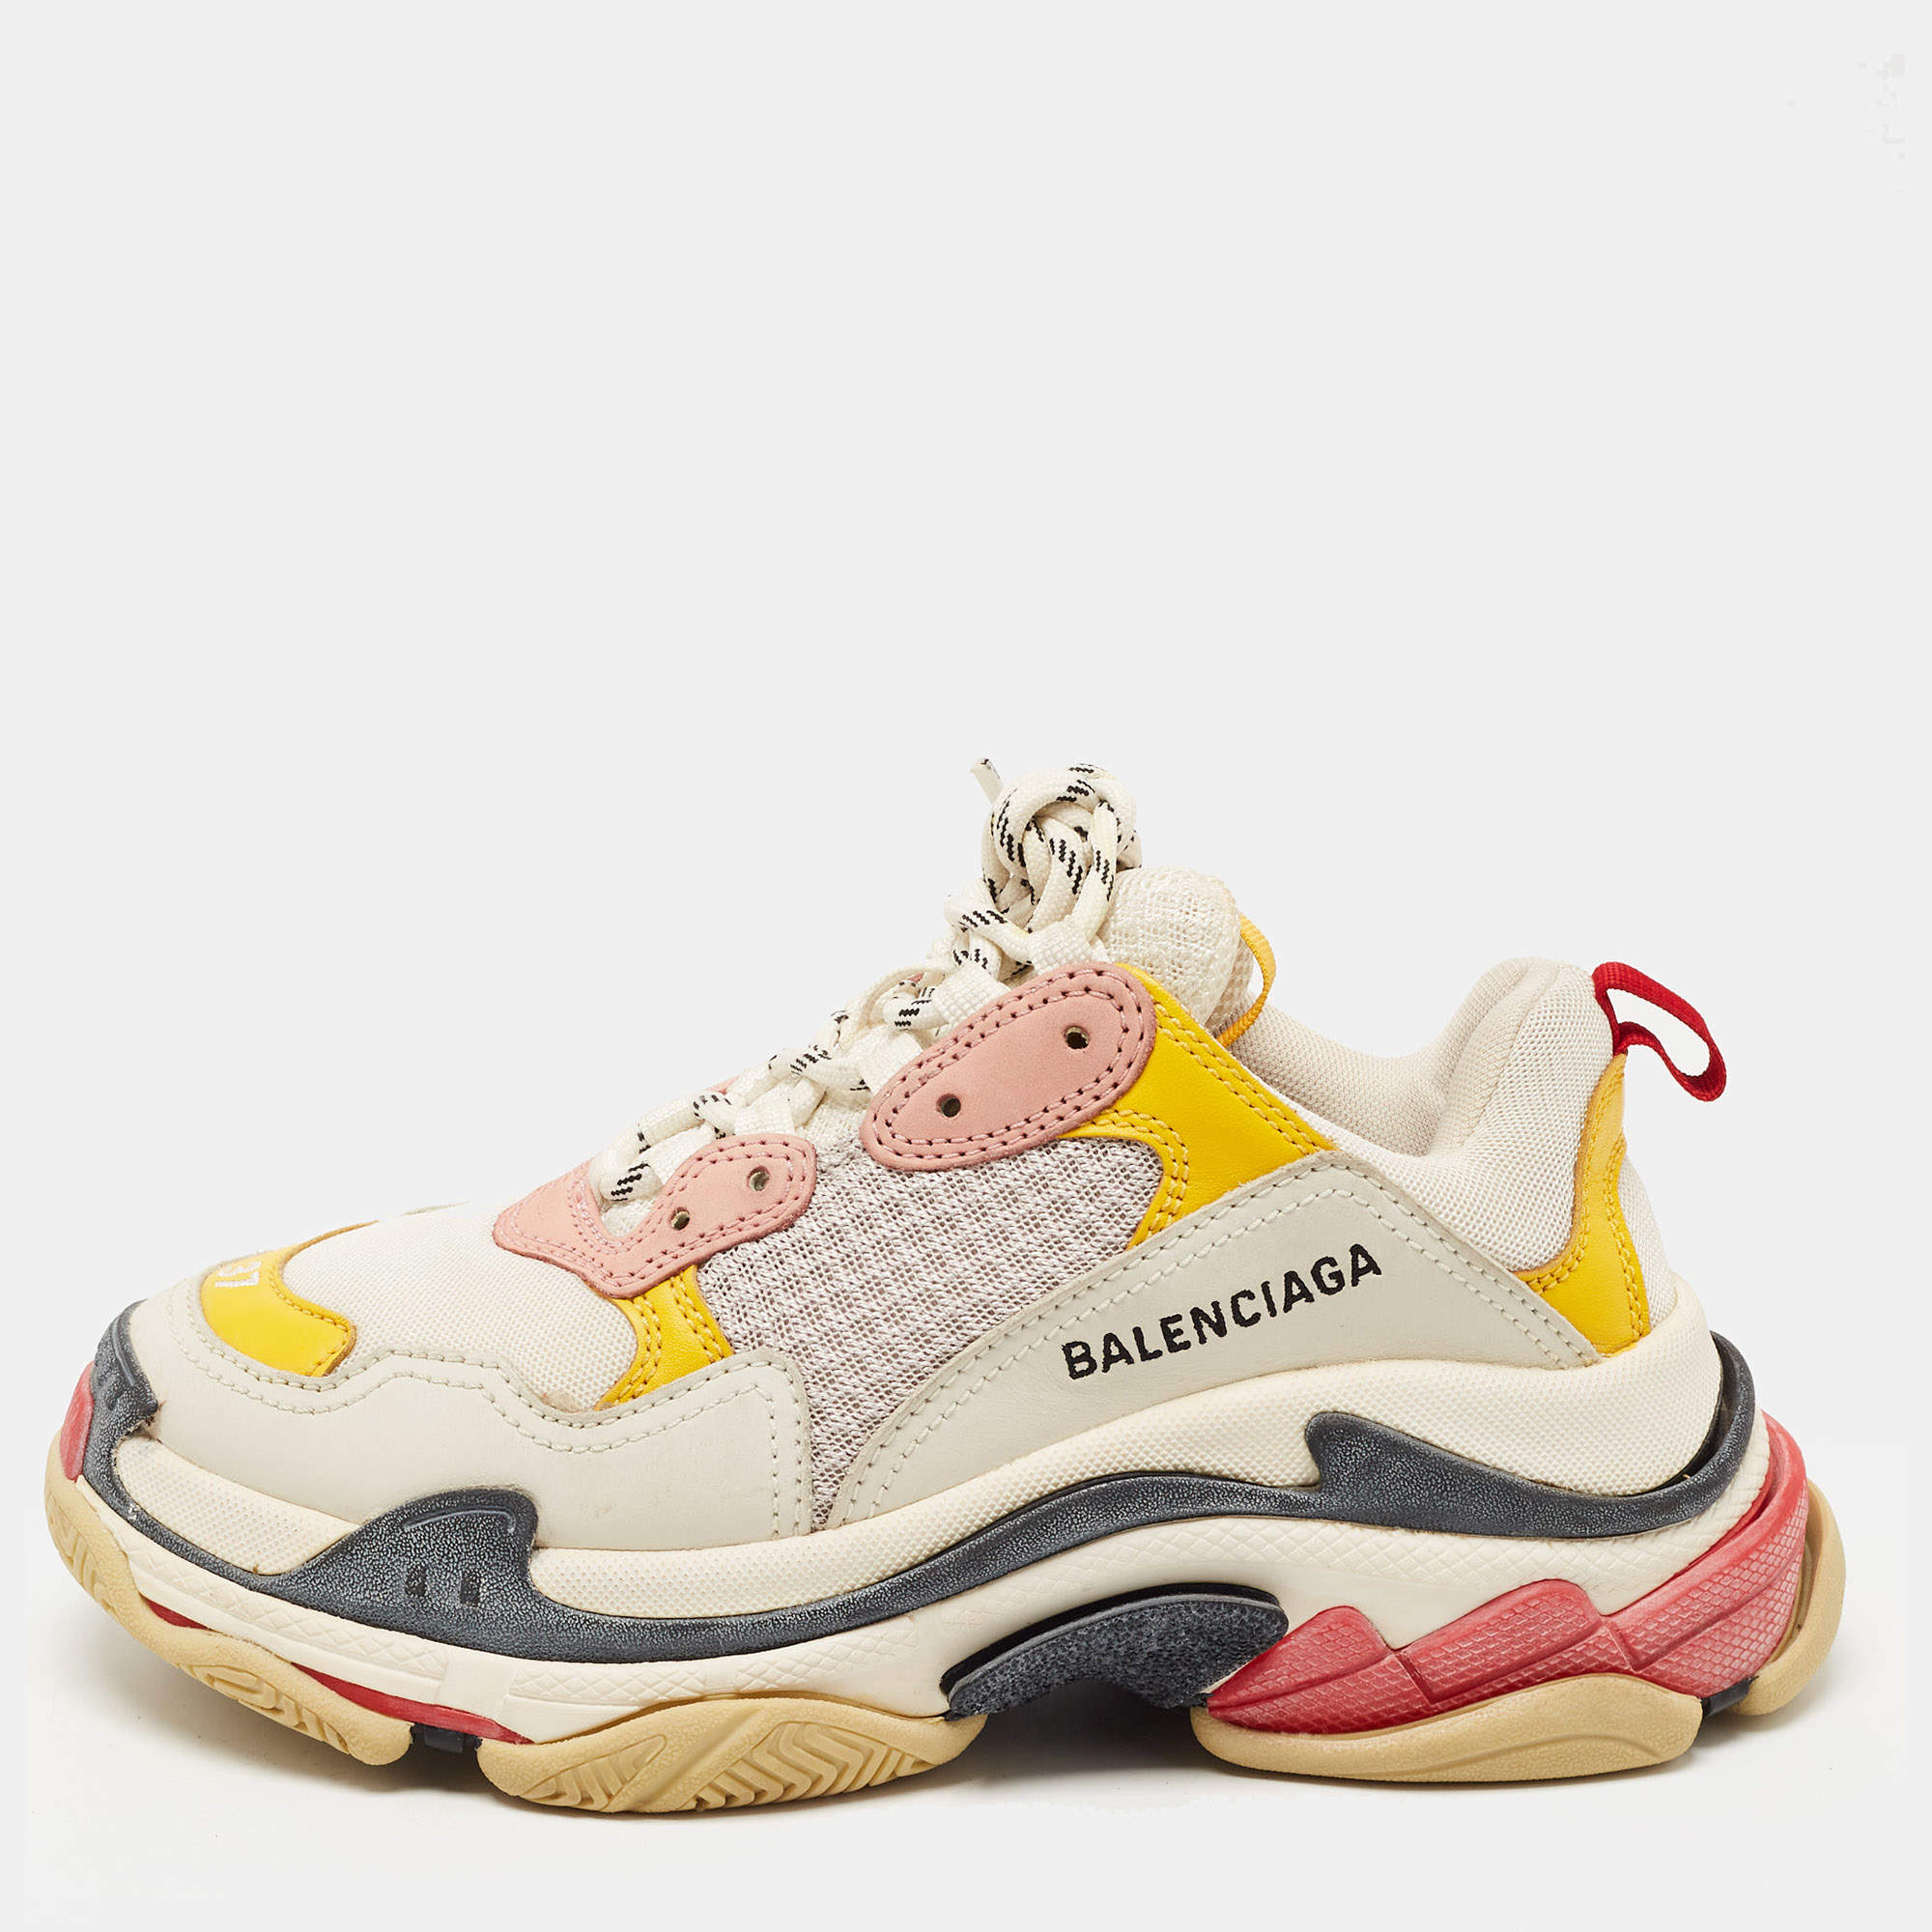 Balenciaga Multicolor Mesh and Leather Triple S Sneakers Size 37